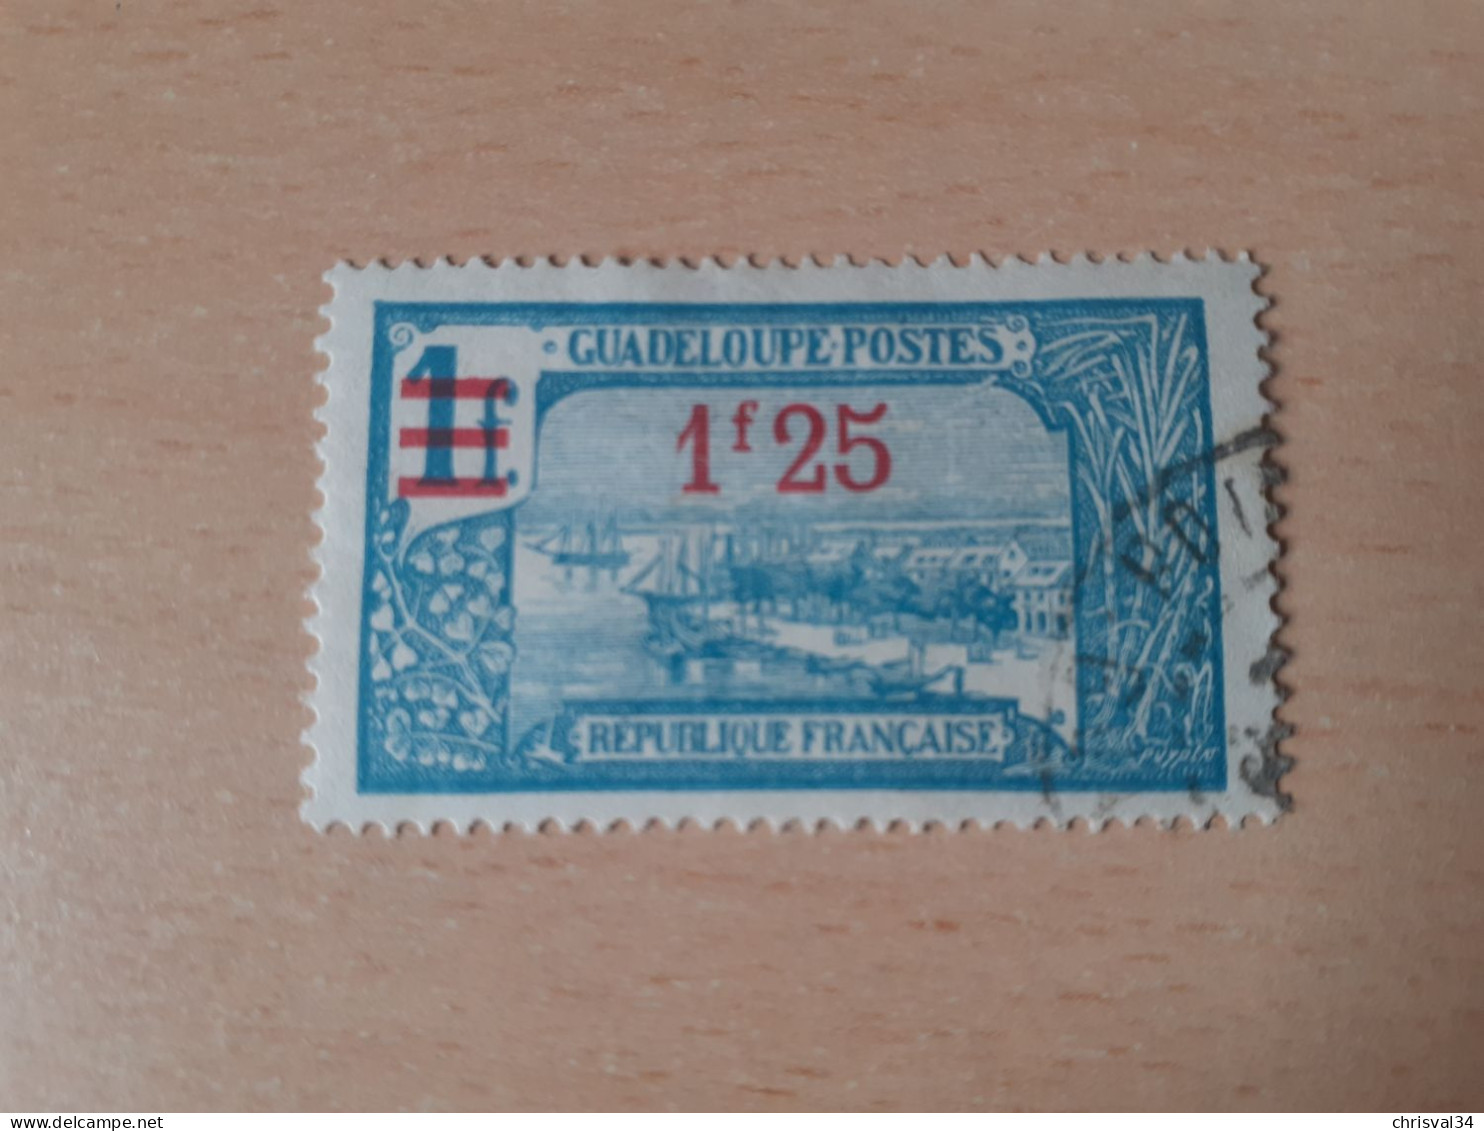 TIMBRE   GUADELOUPE       N  94     COTE  0,75   EUROS  OBLITERE - Gebruikt